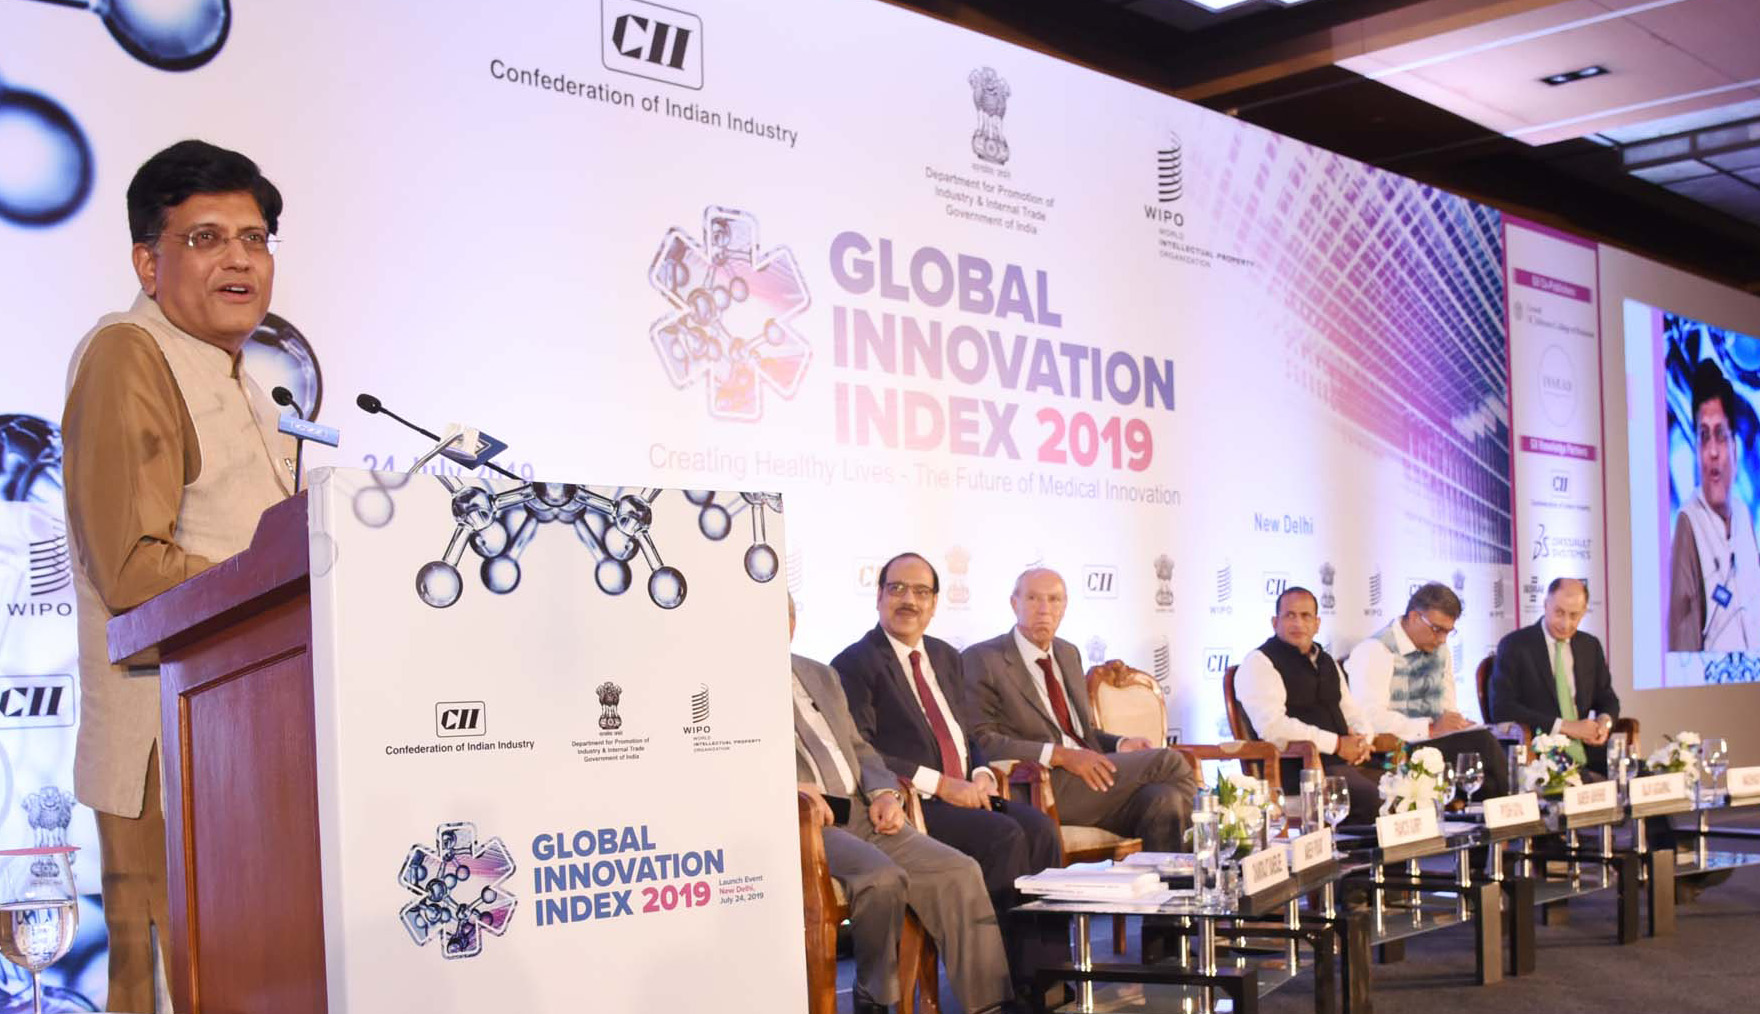 The Union Minister for Railways and Commerce & Industry, Shri Piyush Goyal addressing at the launch of the Global Innovation Index  2019, in New Delhi on July 24, 2019. The Secretary, DPIIT, Shri Ramesh Abhishek and other dignitaries are also seen.